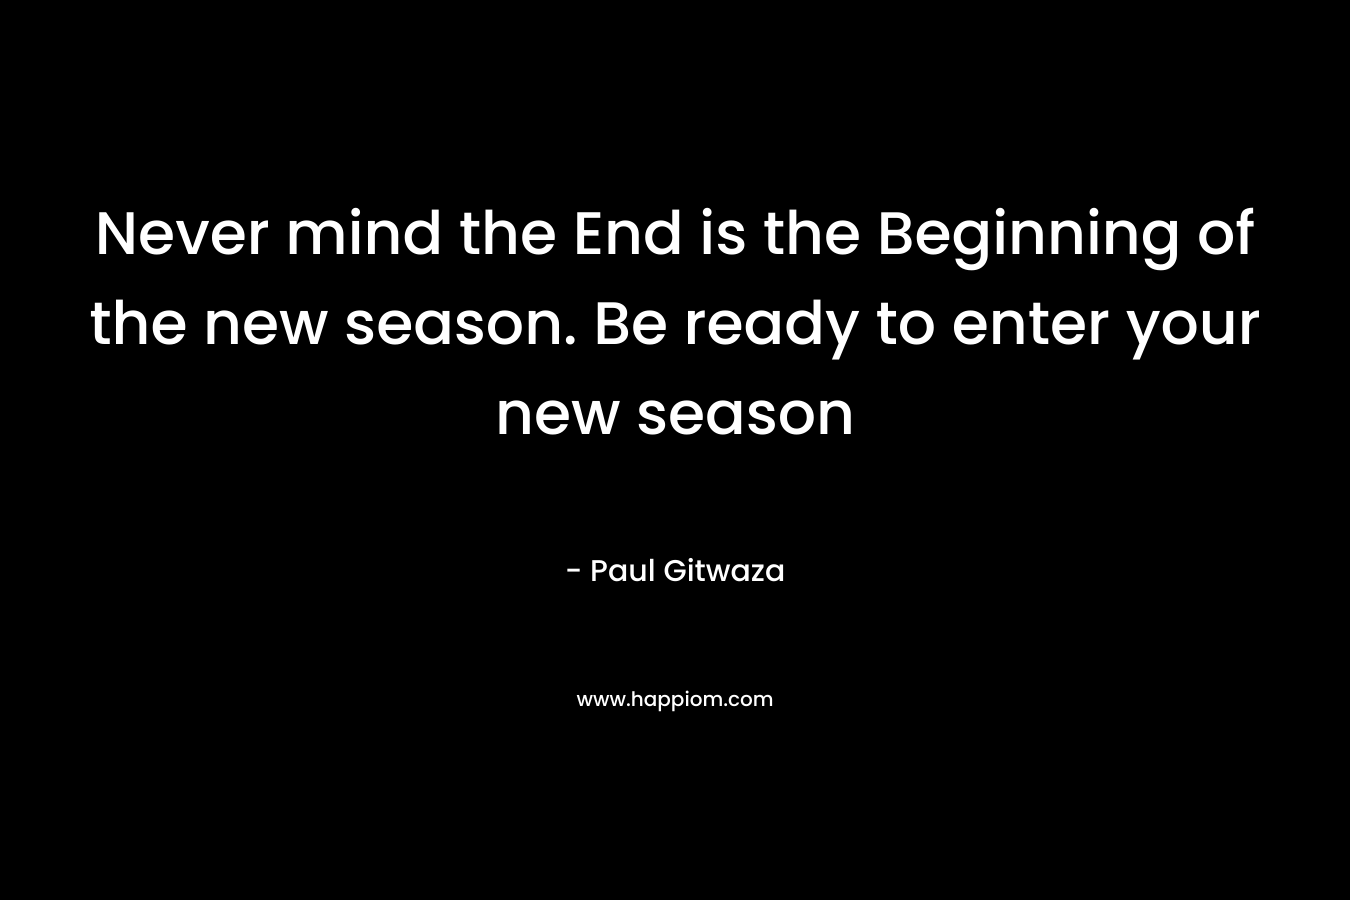 Never mind the End is the Beginning of the new season. Be ready to enter your new season